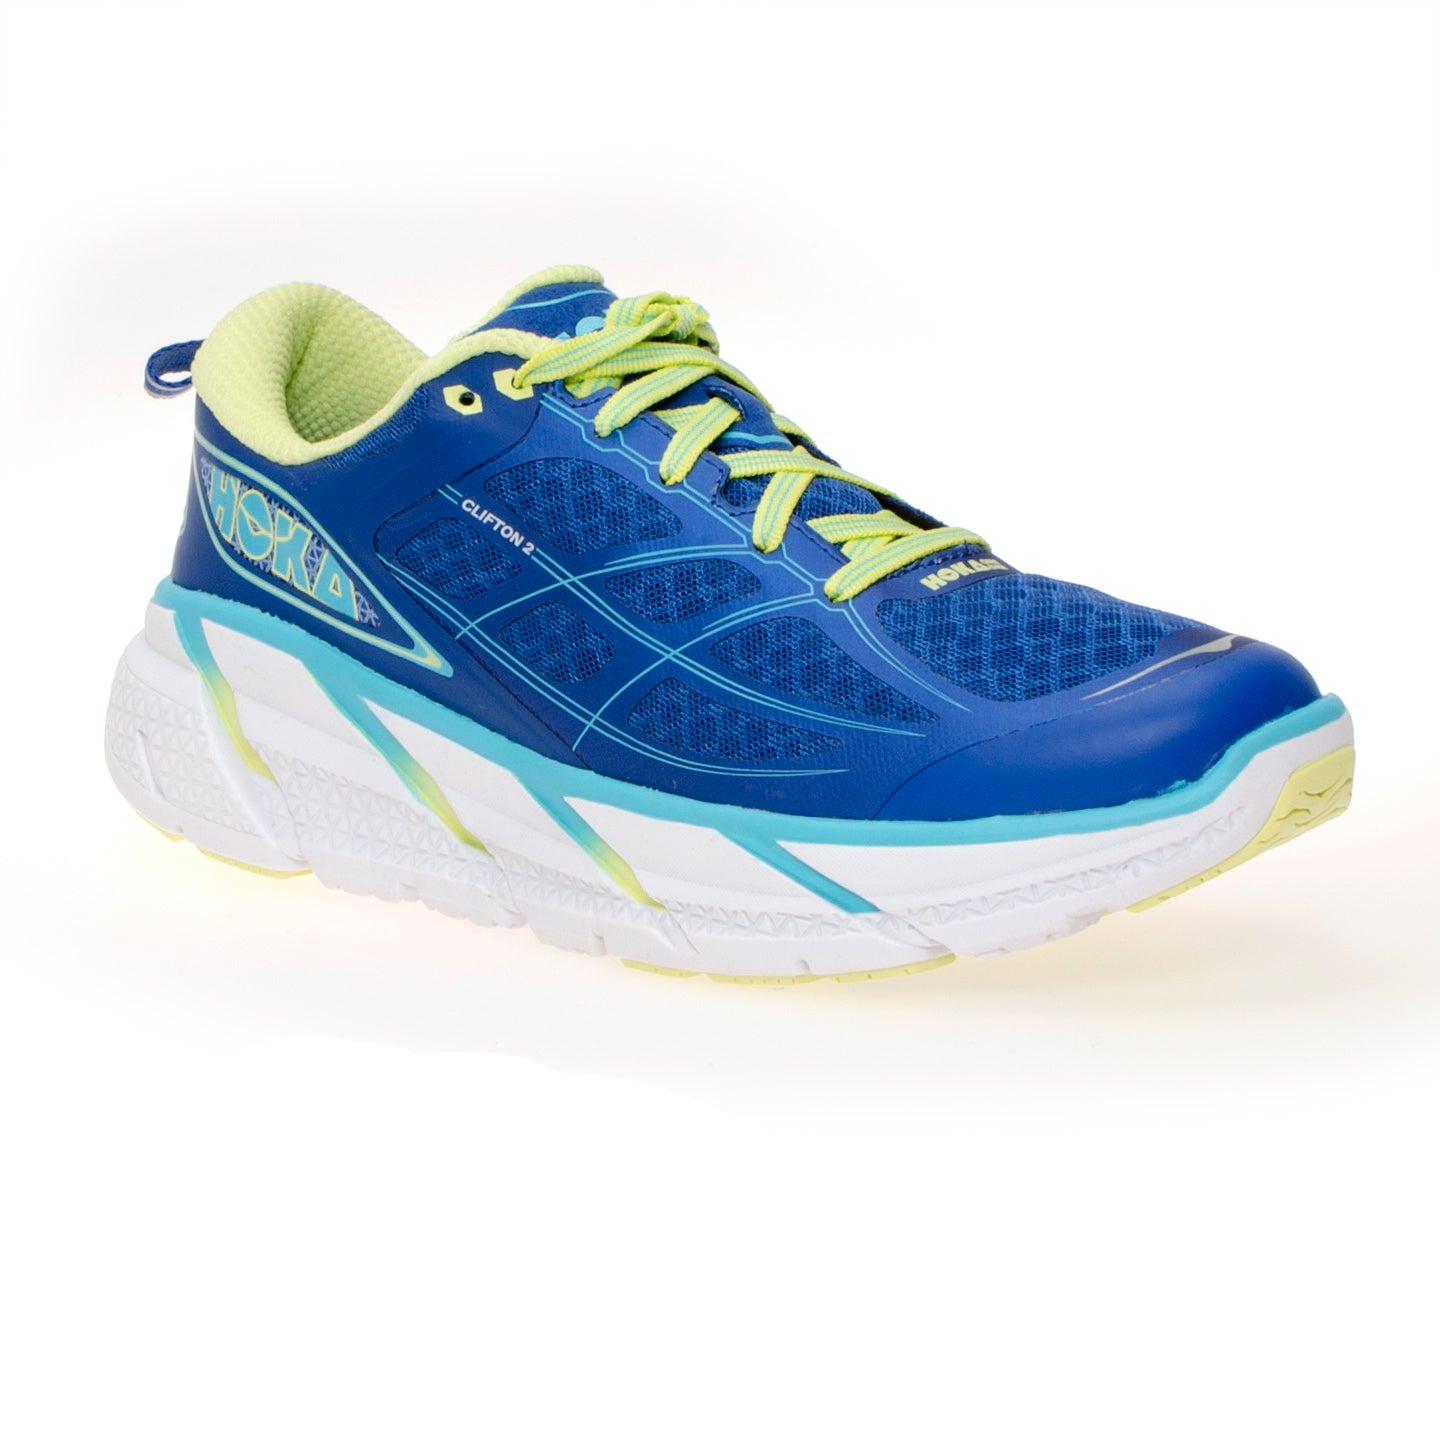 Hoka One One Clifton 2 True Blue / Sunny Lime Running Shoes - Women's ...